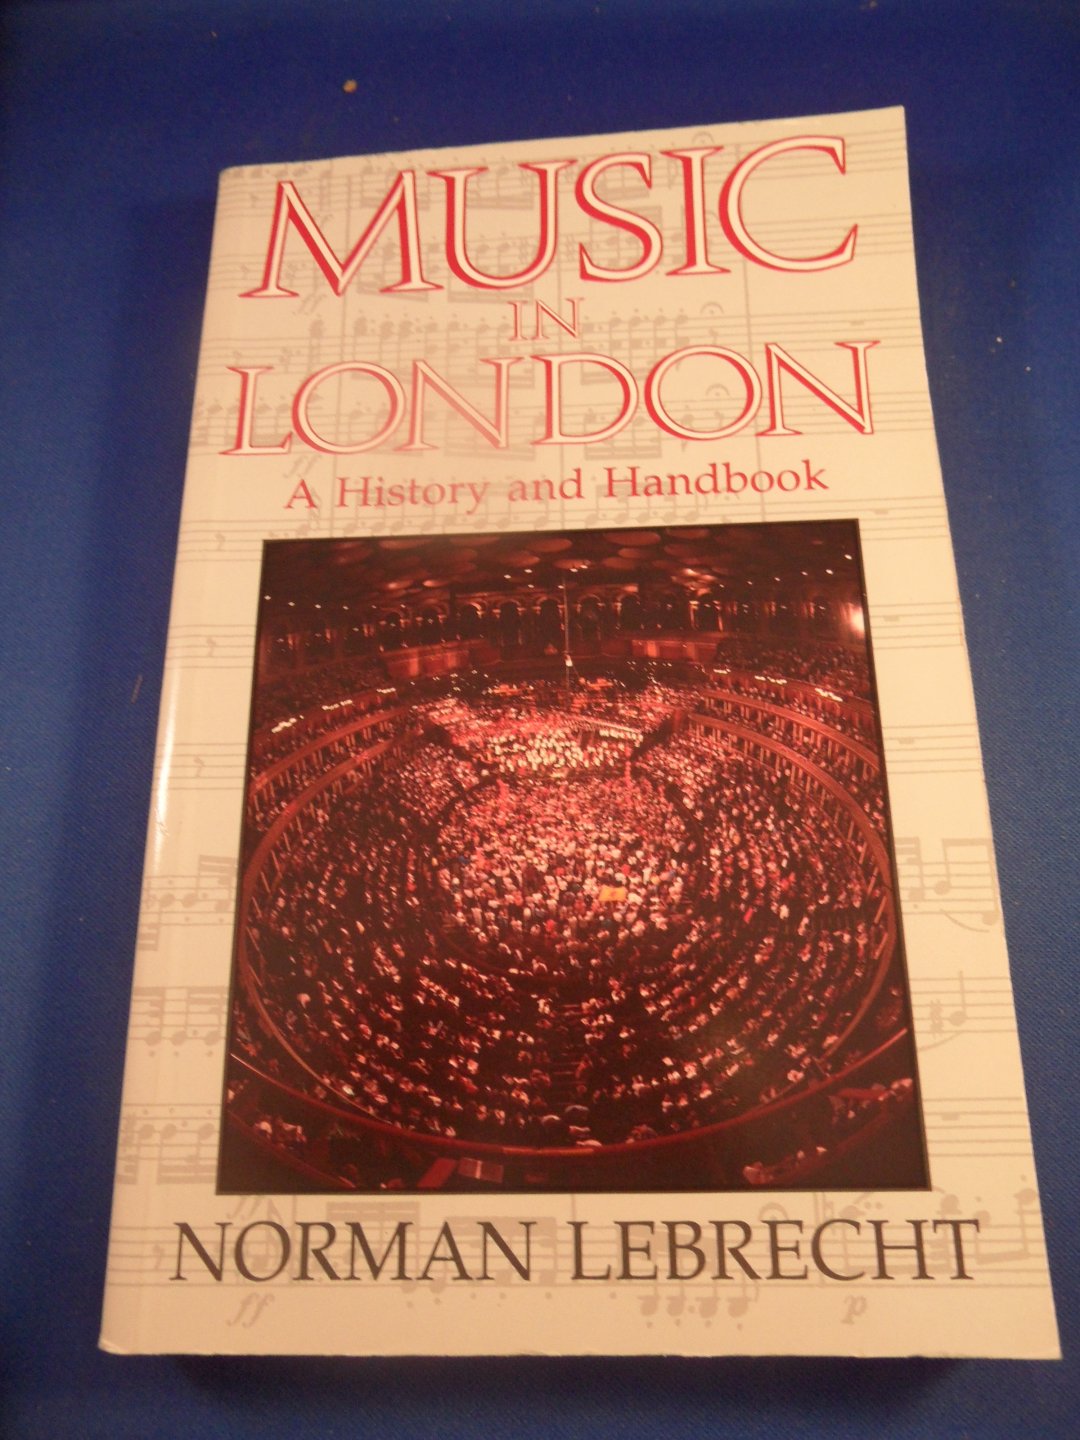 Lebrecht, Norman - Music in London. A history and handbook 